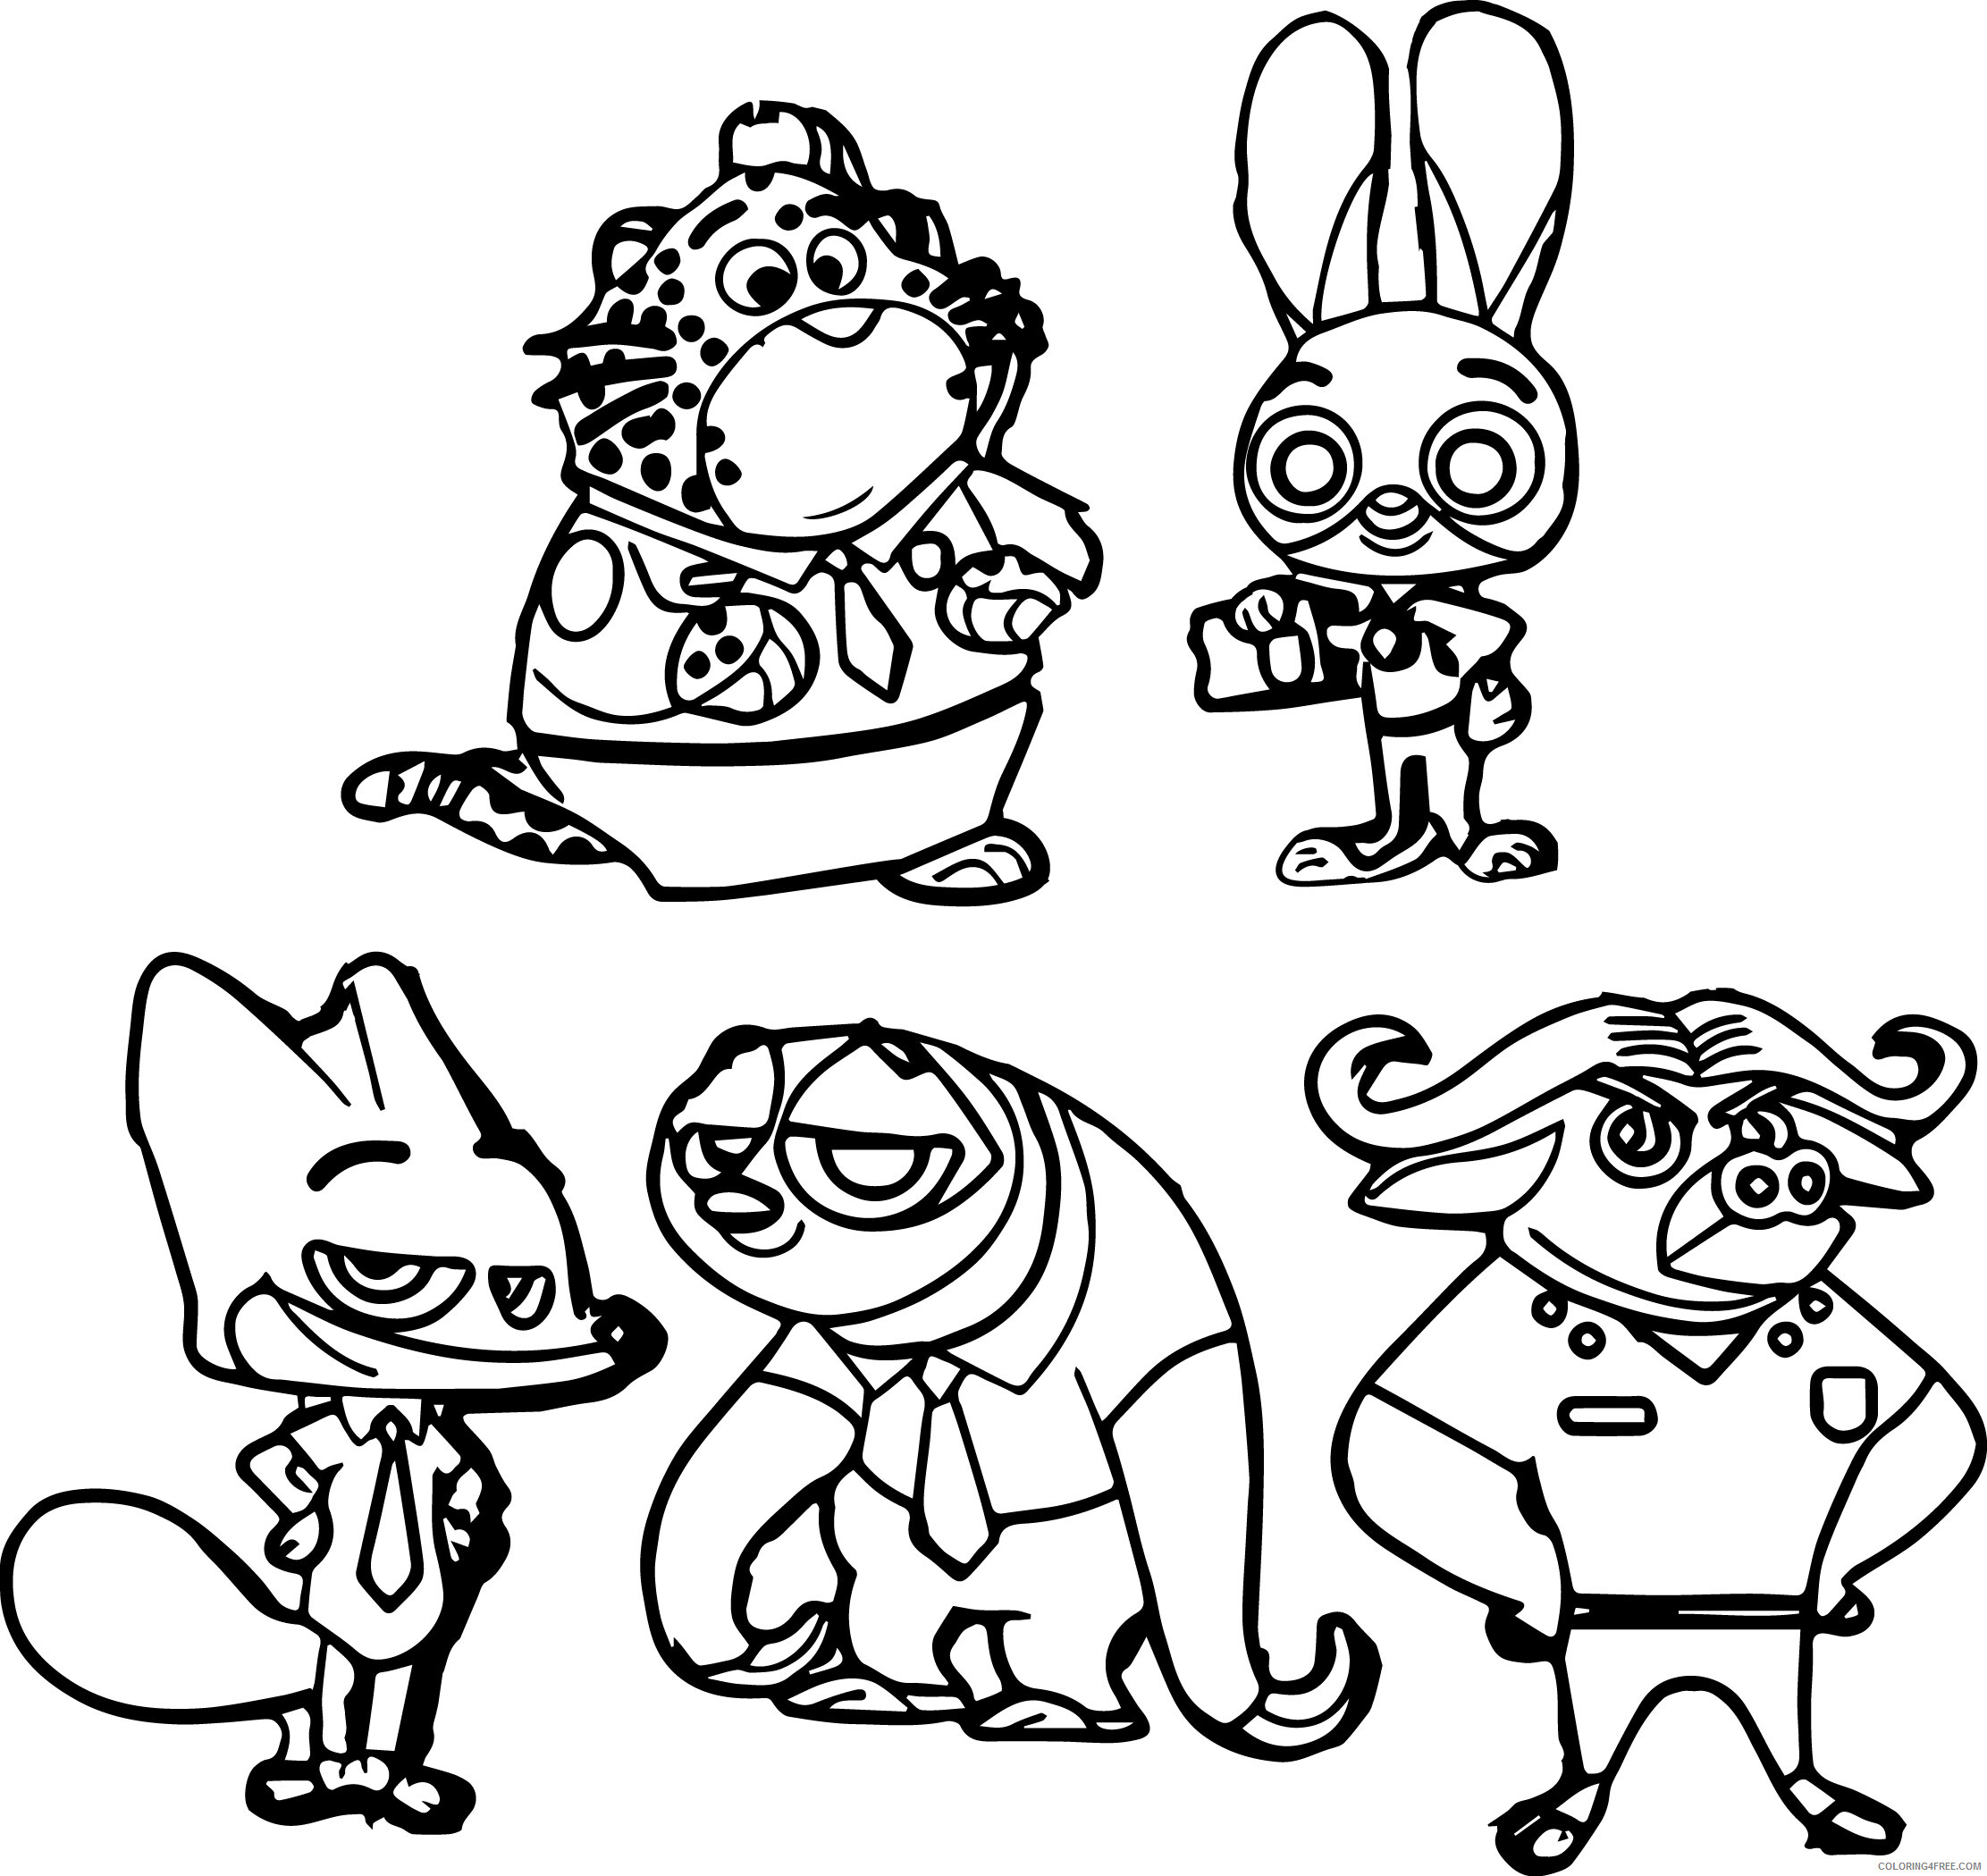 Zootopia Coloring Pages TV Film Zootopia characters Printable 2020 12034 Coloring4free